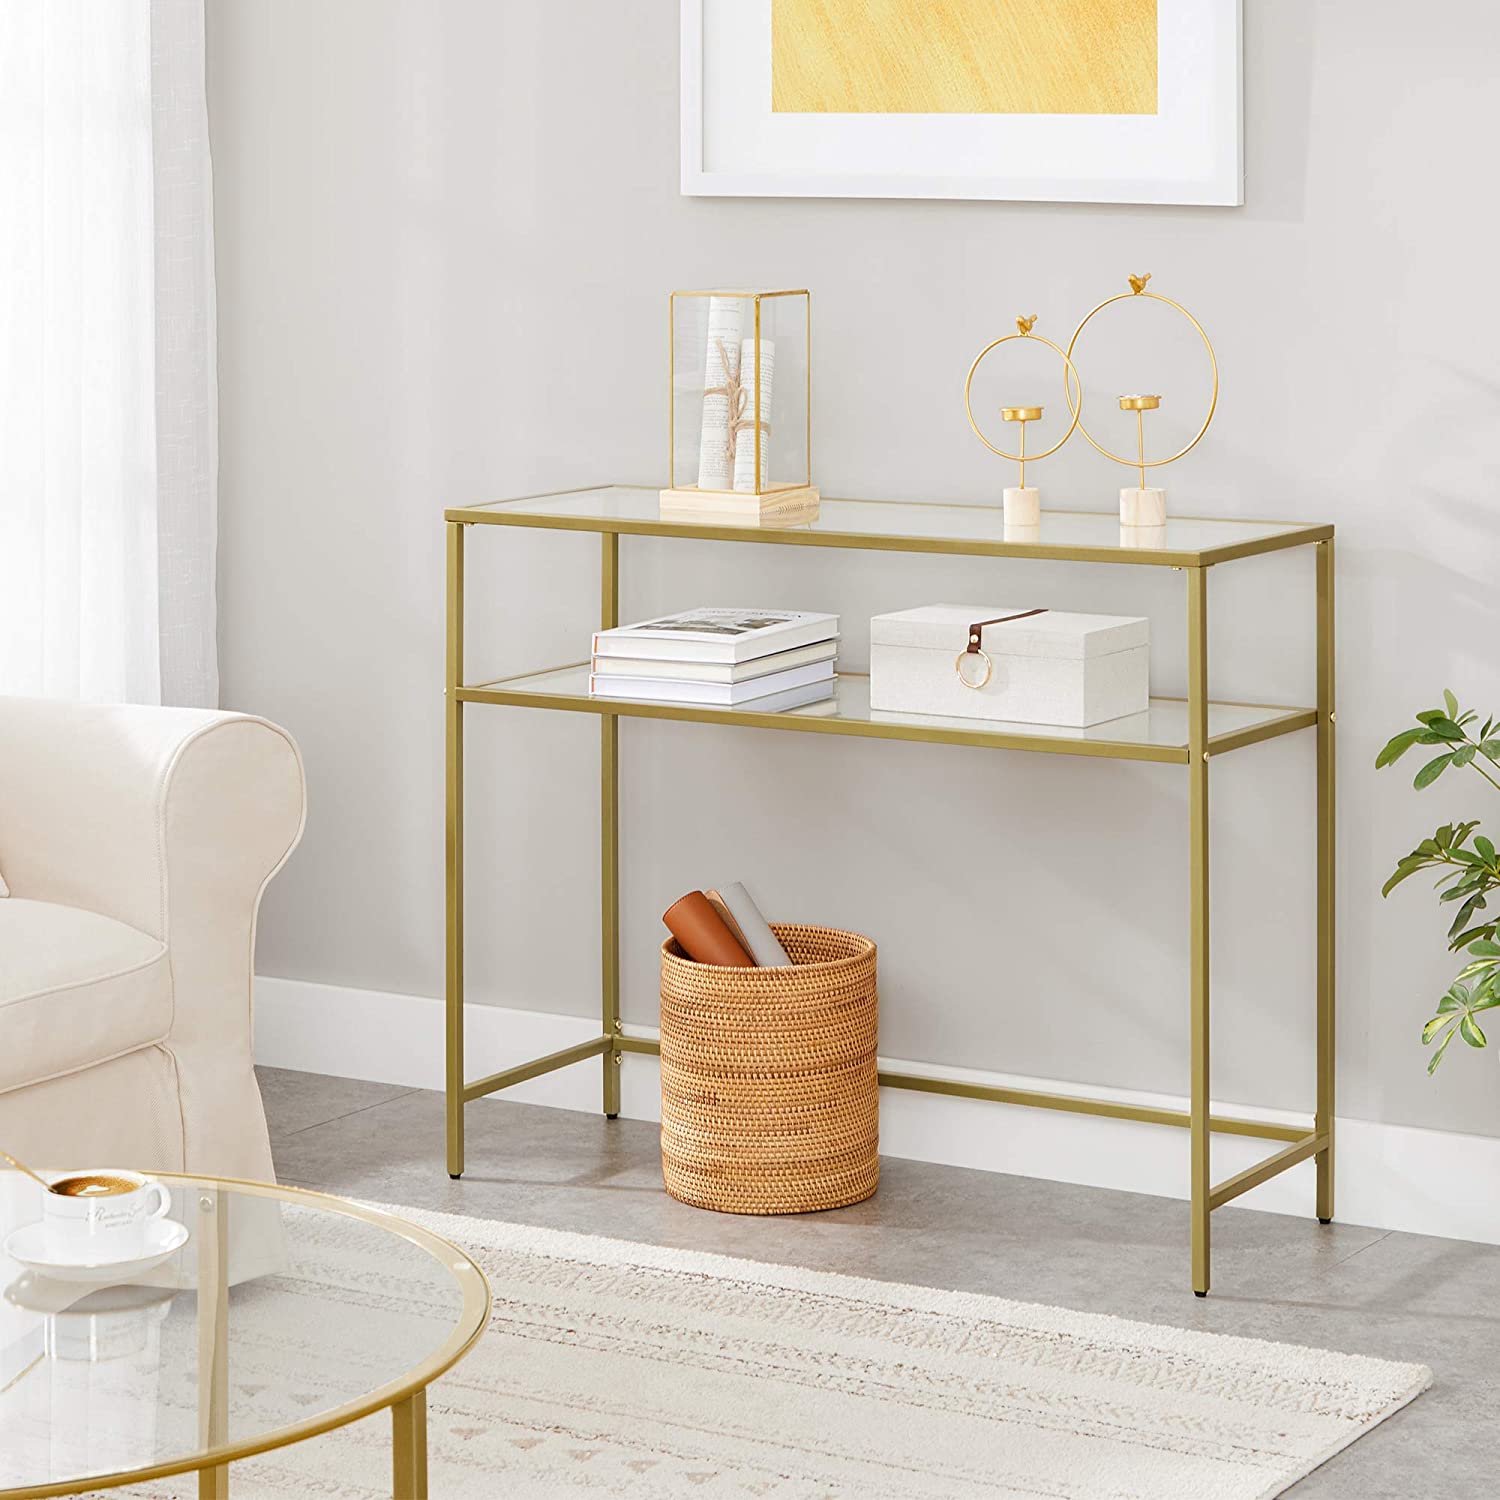 Nancy's Goldfield Console Table - Side Table - 2 Levels - Tempered Glass - Metal Frame - Adjustable Legs - Gold - 35 x 100 x 80 cm